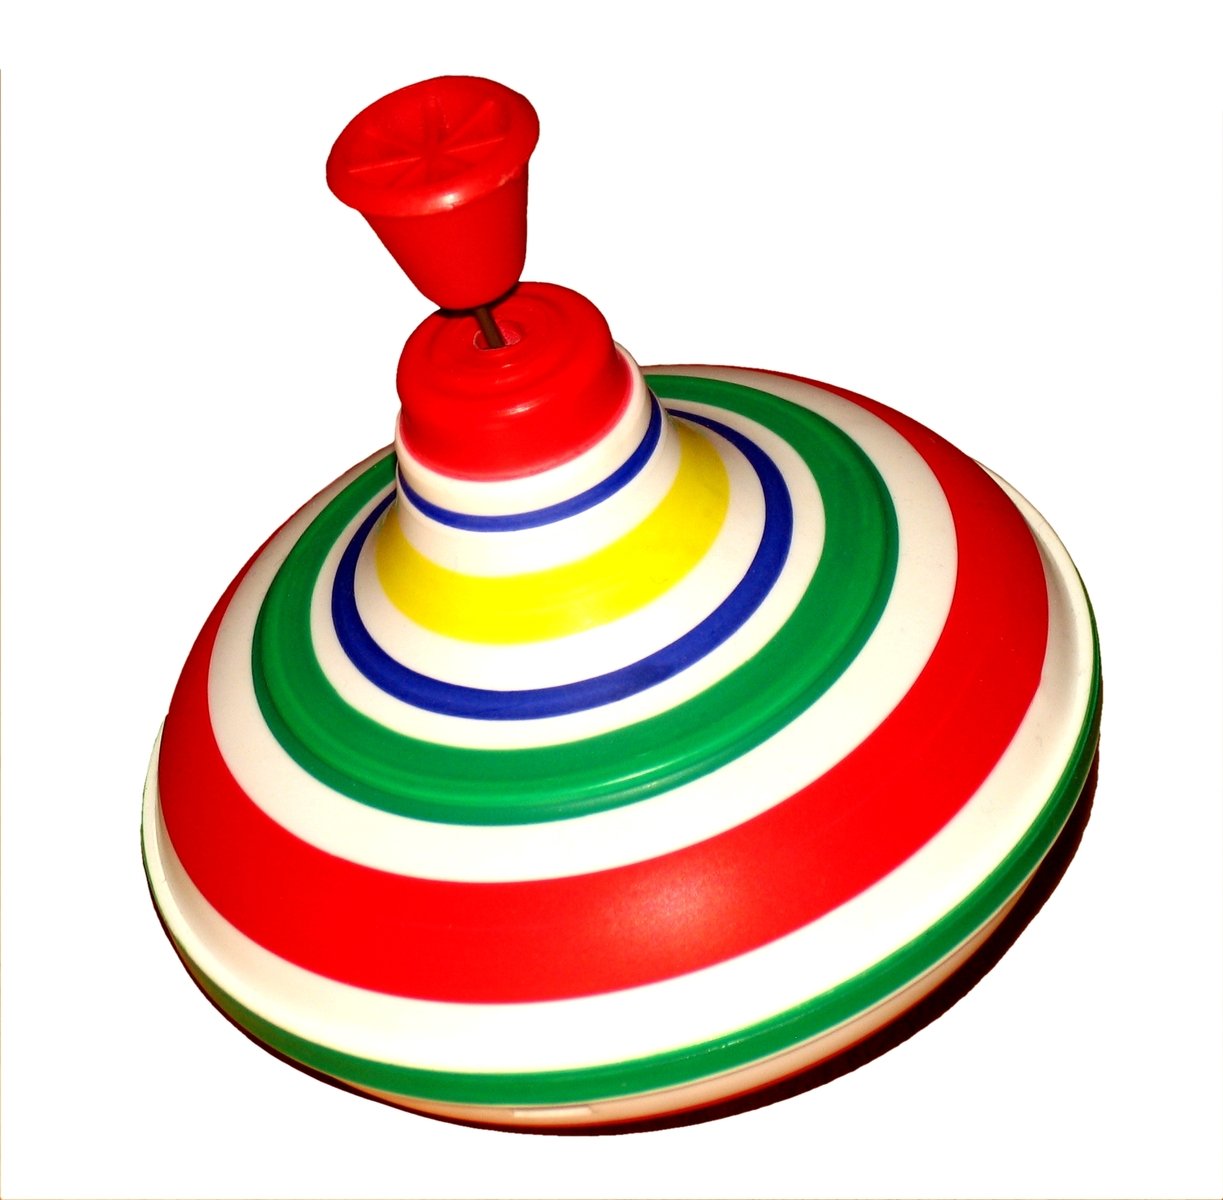 a colorful red on on top of a striped toy